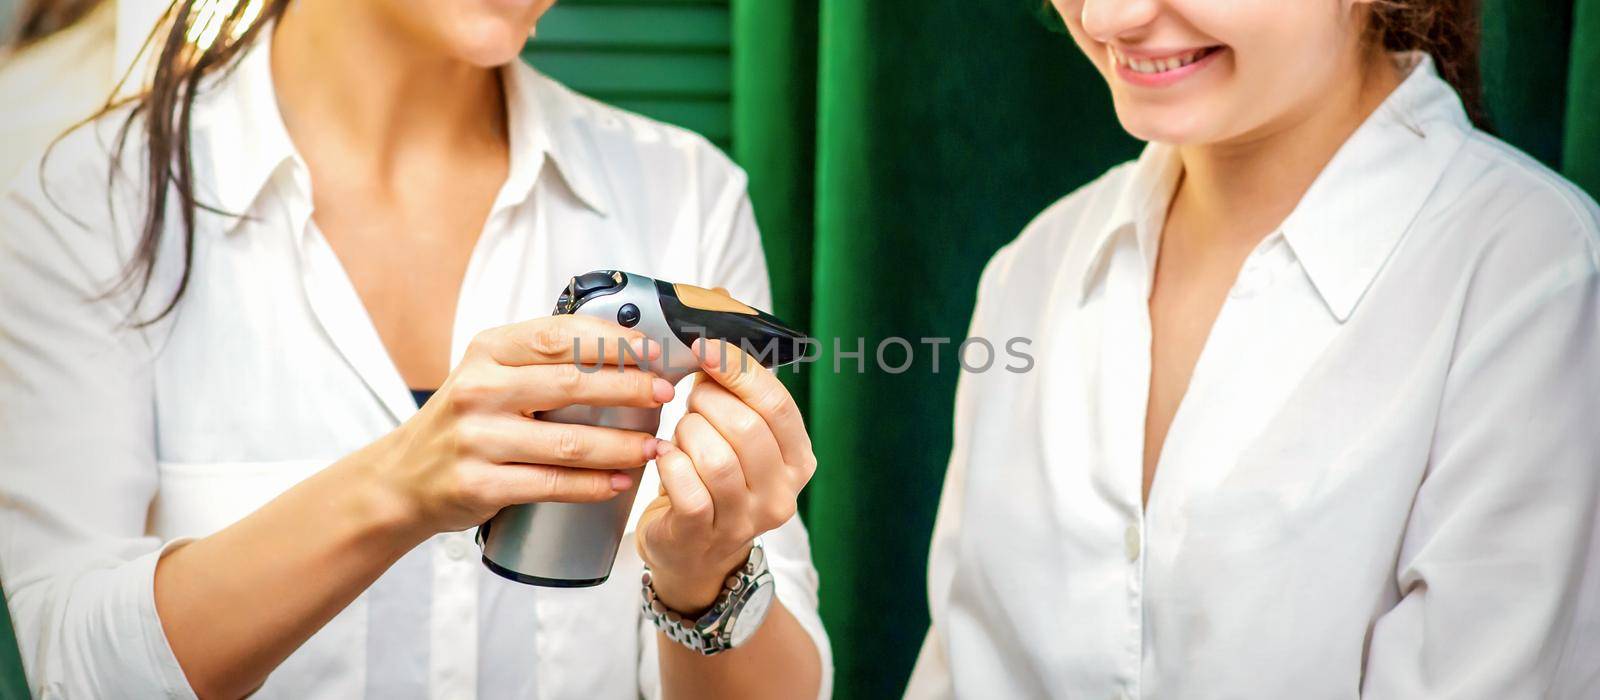 Smiling makeup artist shows for her smiling client aerograph tool device before airbrush procedure in a beauty salon